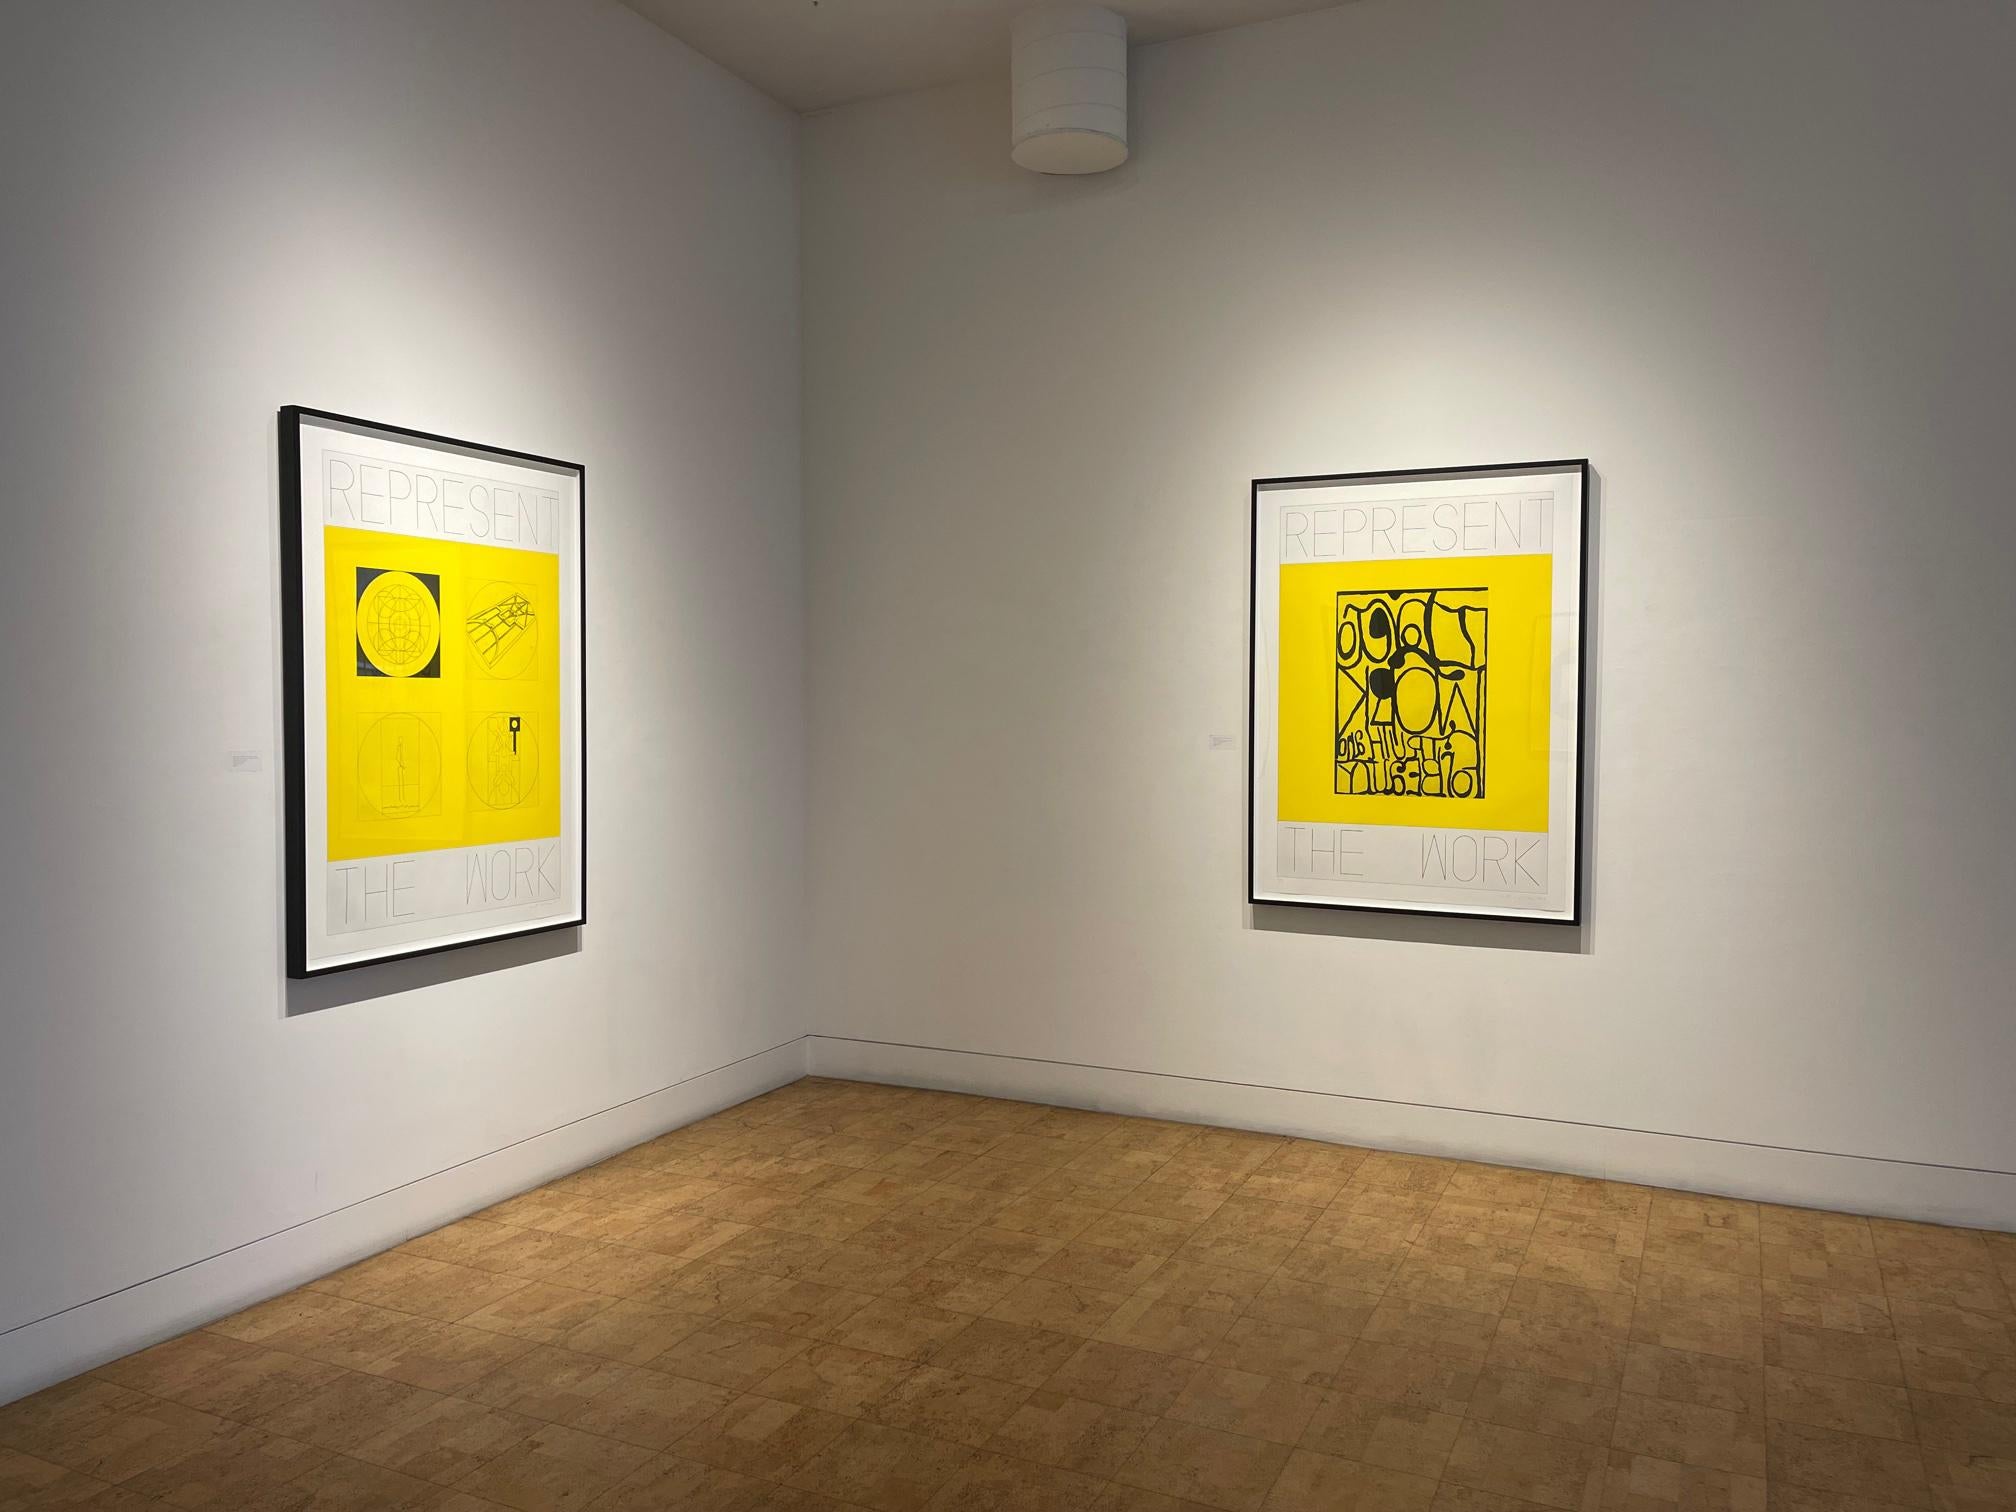 REPRESENT THE WORK, Person and Place, 2020
Aquatint with soft ground and hard ground etching printed in yellow and black.
Image size: 51½ x 35½